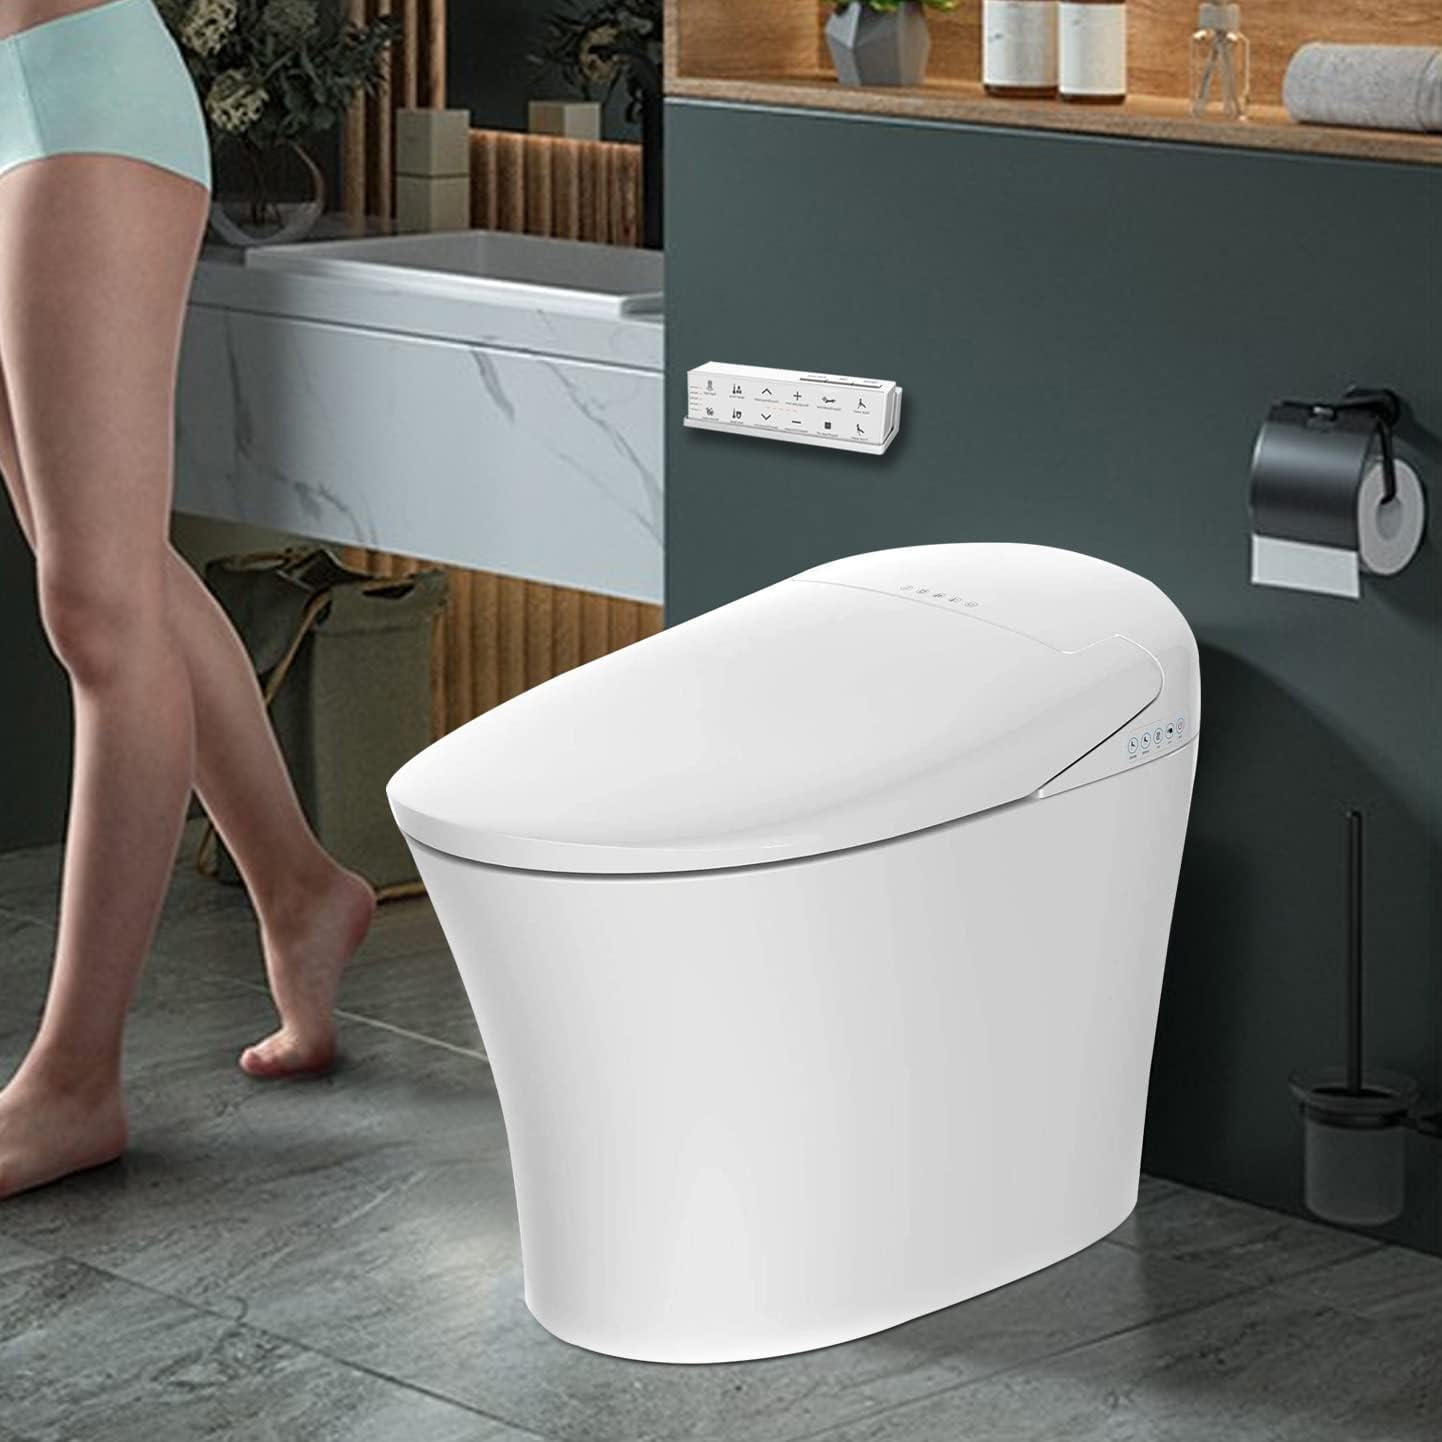 Smart Toilet, Auto Flush, Heated Seat with Integrated Remote Control, With Advance Bidet And Soft Closing Seat, Smart Bidet, Auto Toilet Cover, Seat Sensor